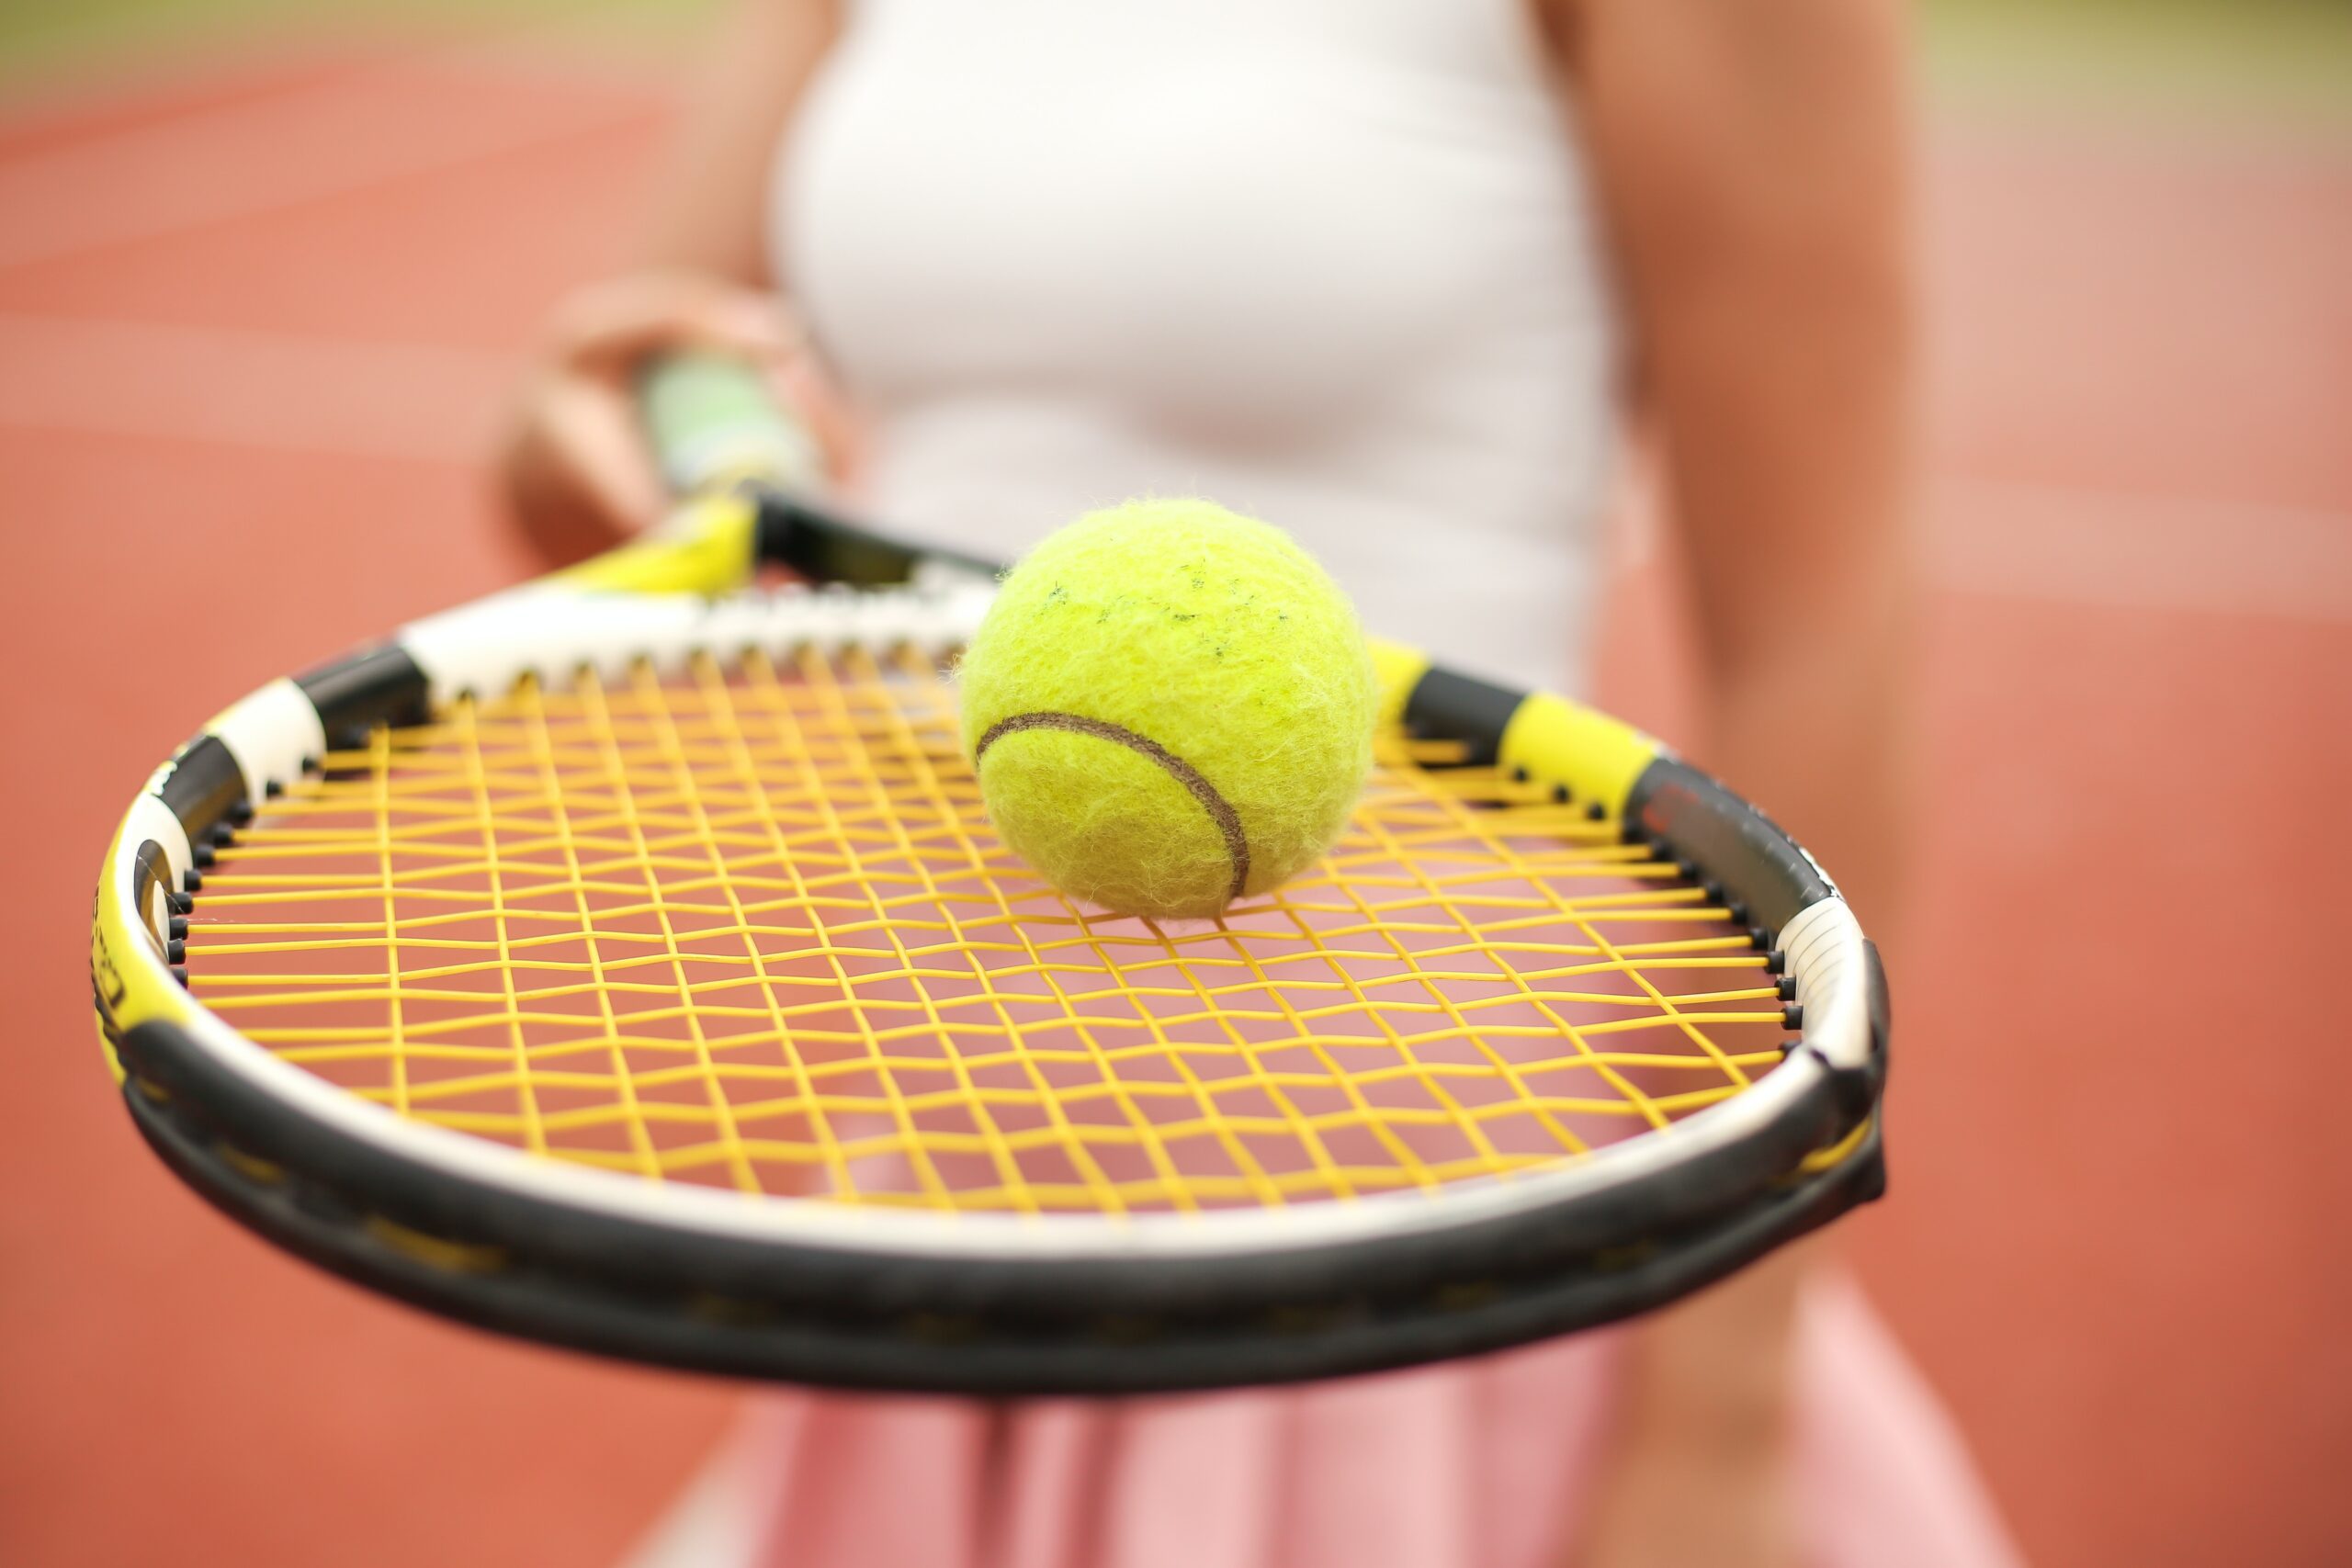 Game, Set, Match! From a Subpar Tennis Lesson to an Improved Business Coaching Approach